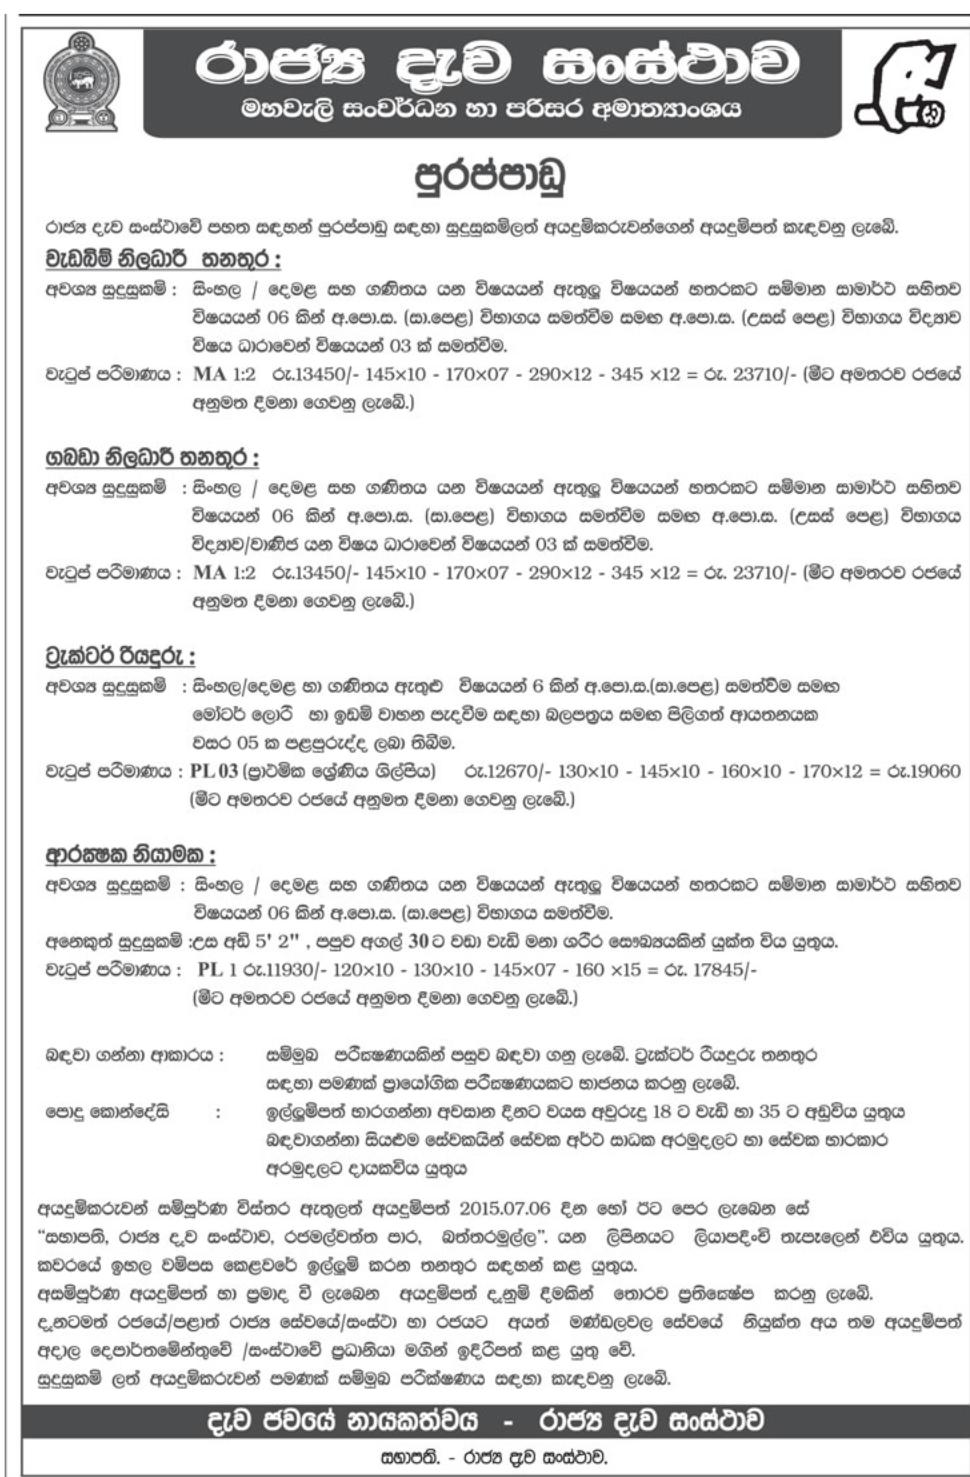 Site Officer Jobs Vacancies in State Timber Corporation